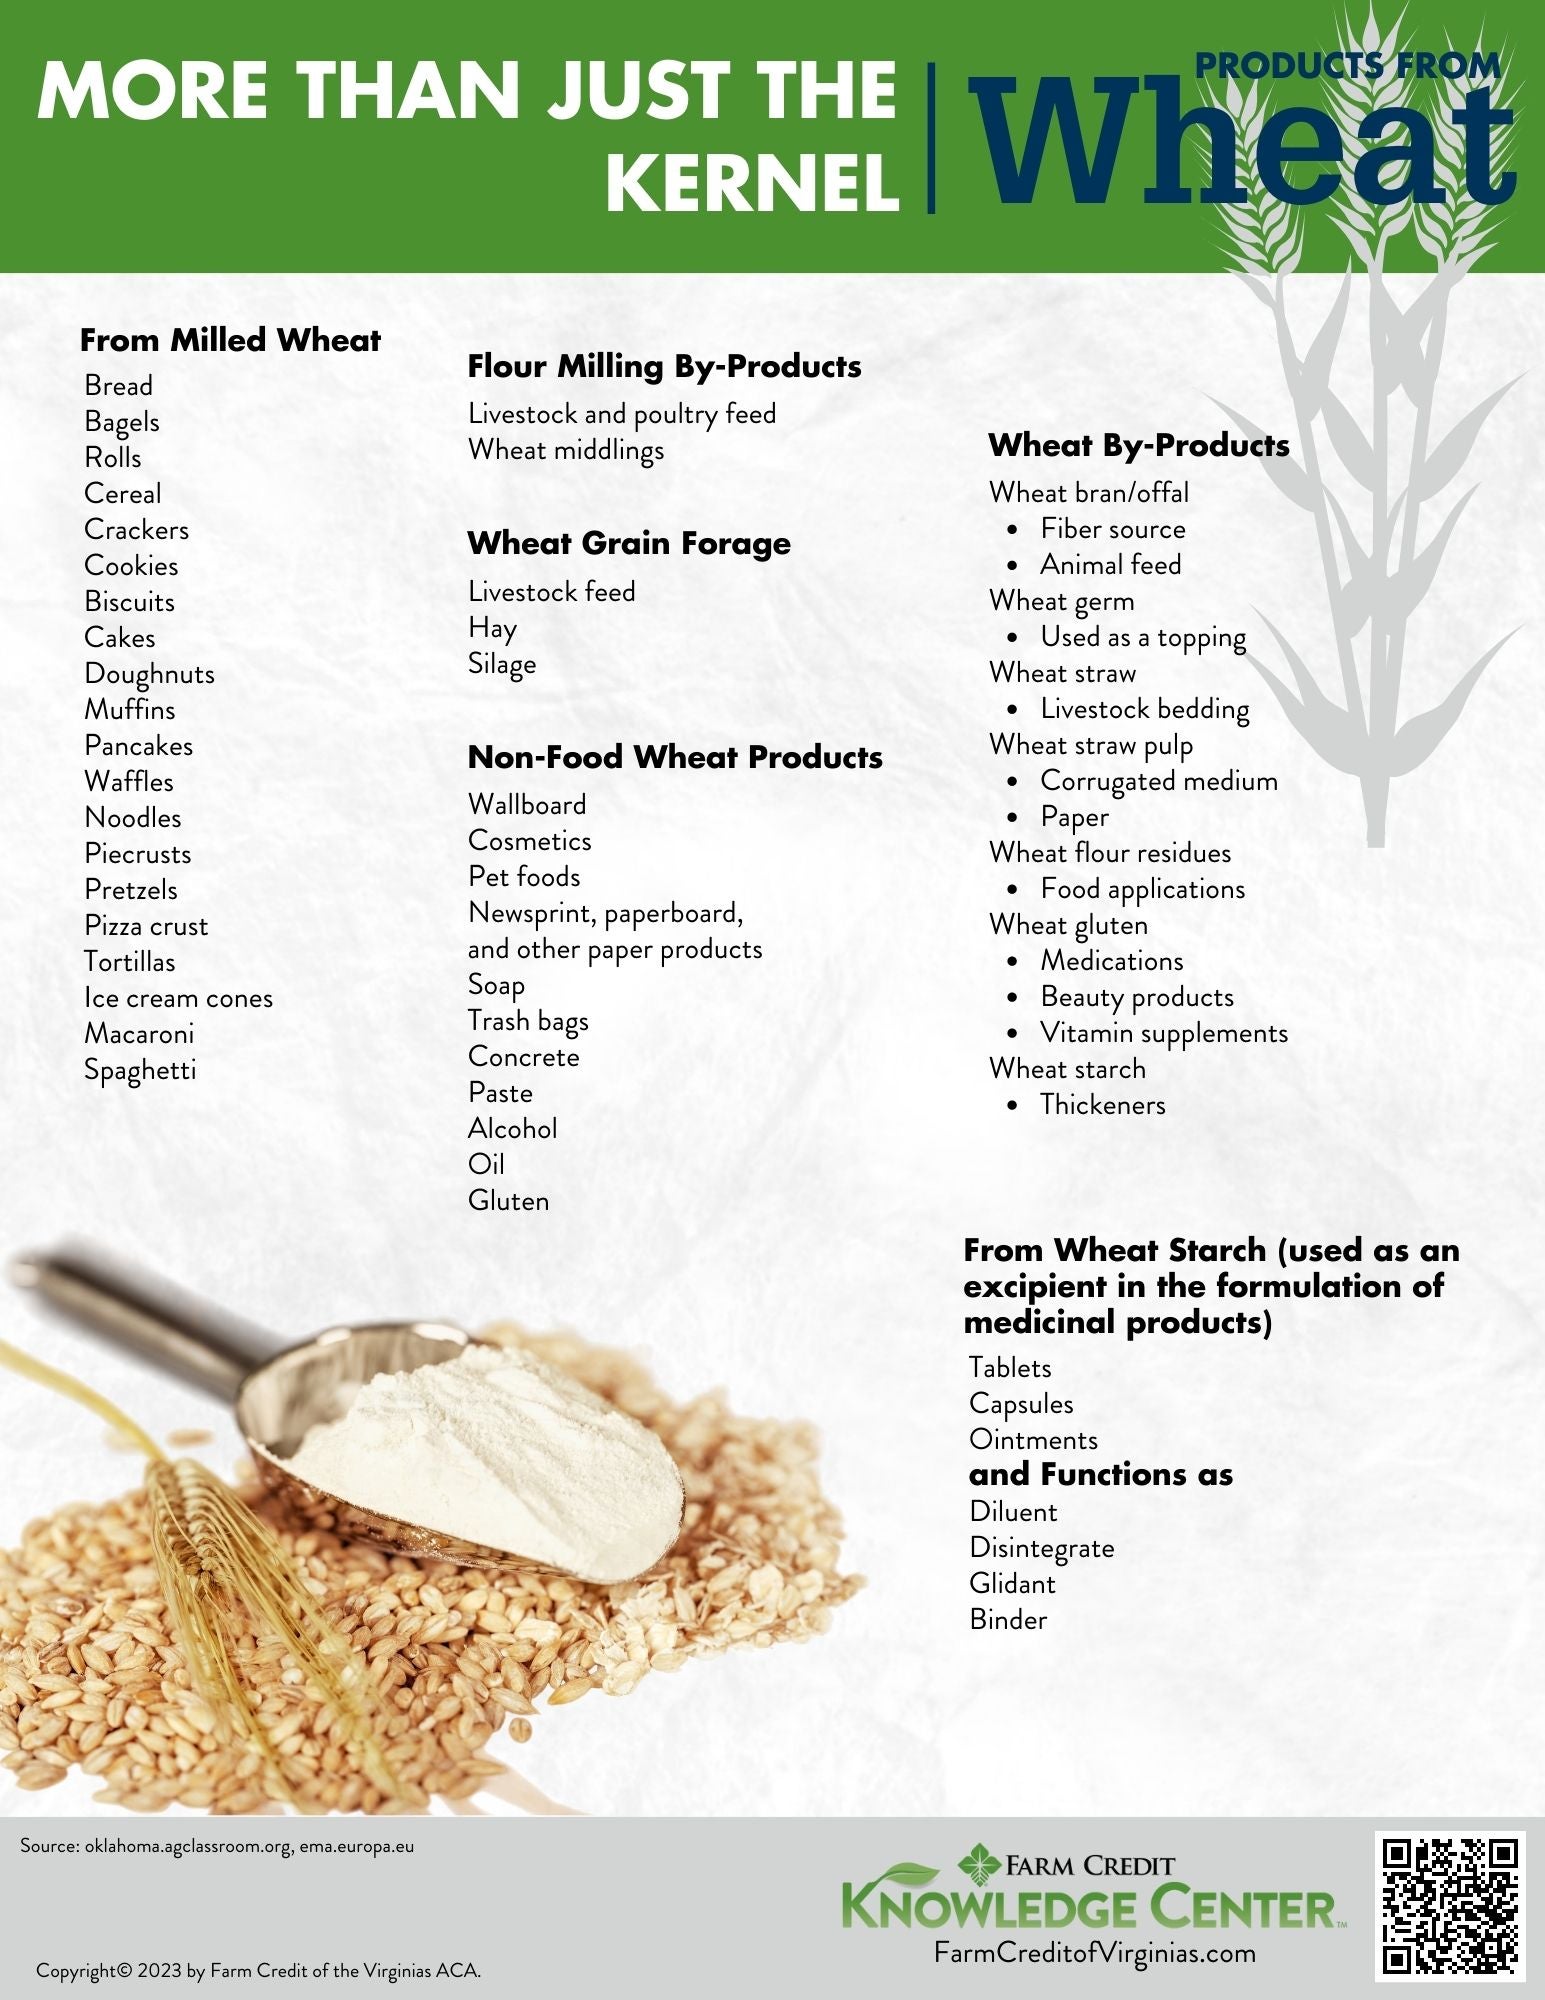 More than just the kernel products from wheat infographic